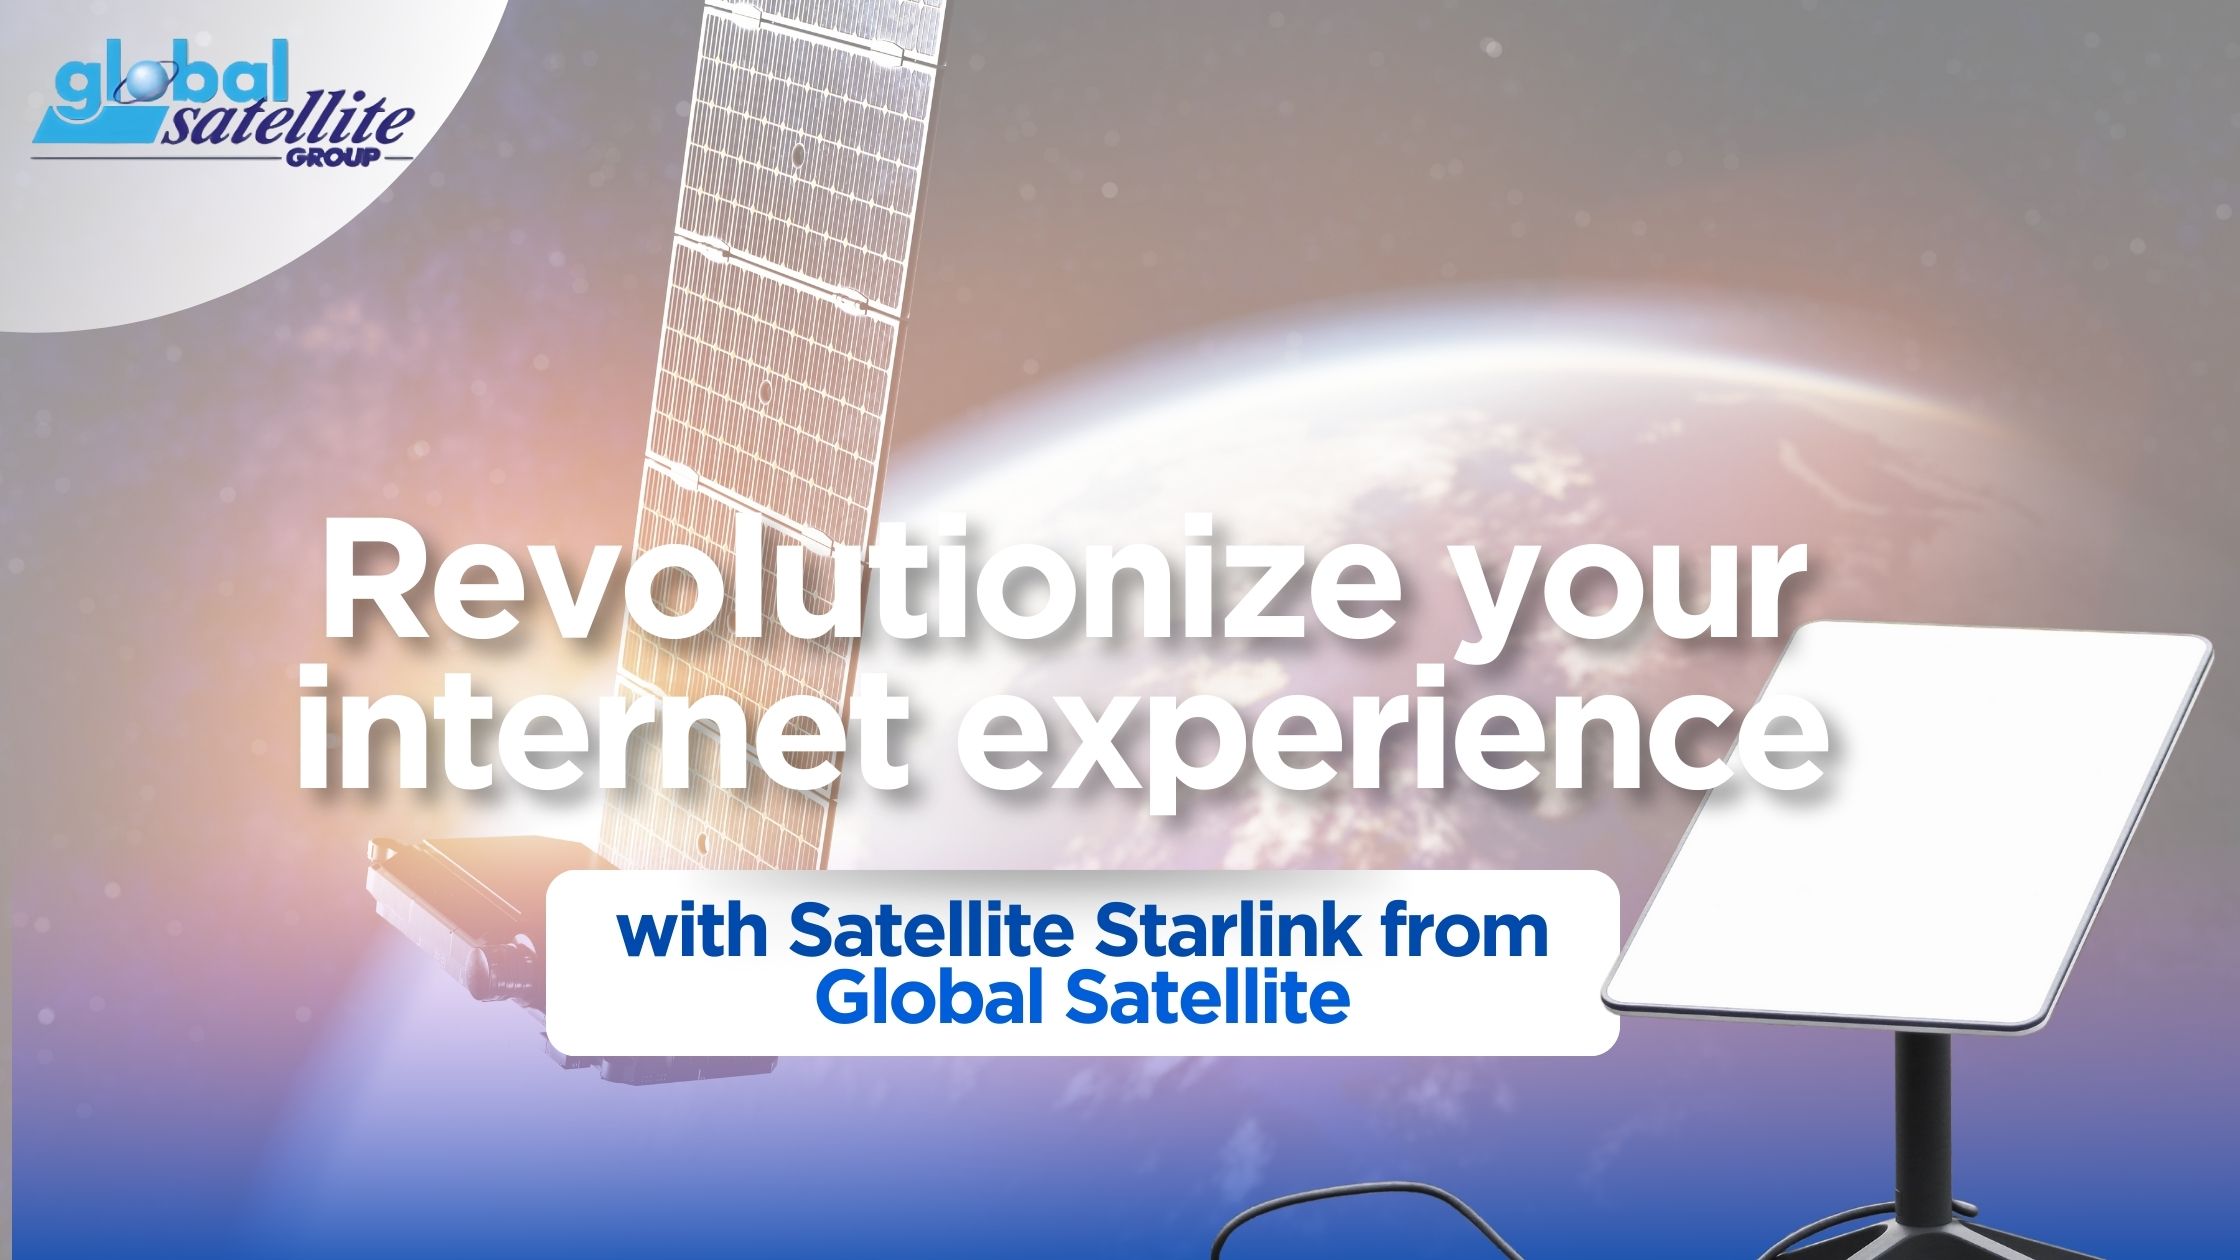 Revolutionizing Connectivity with Satellite Starlink: At Global Satellite